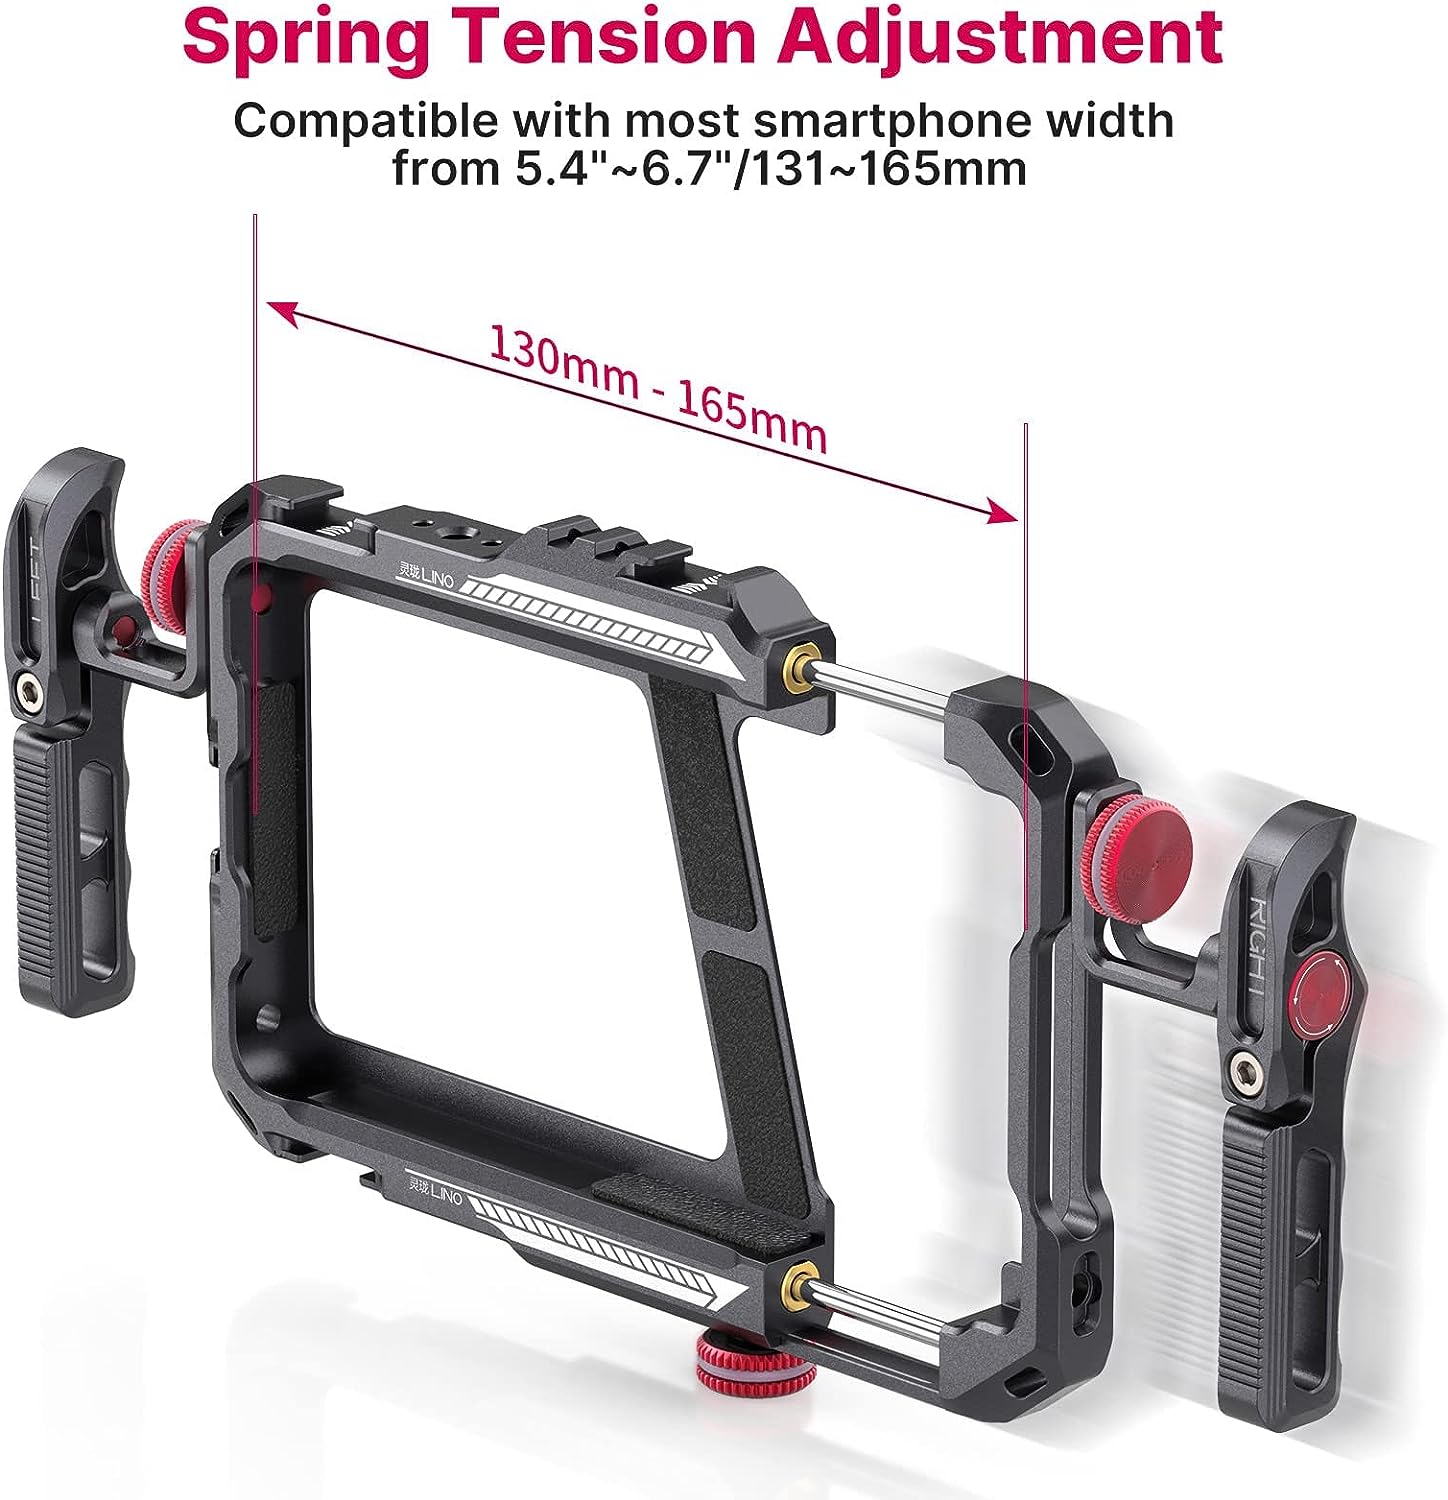 ULANZI Smartphone Video Rig with Handle, LINO Filmmaking Case Aluminum Alloy Phone Video Stabilizer Grip Tripod Mount for Video Maker Videographer with Cold Shoe for iPhone 13 Mini Pro Max 8 Plus